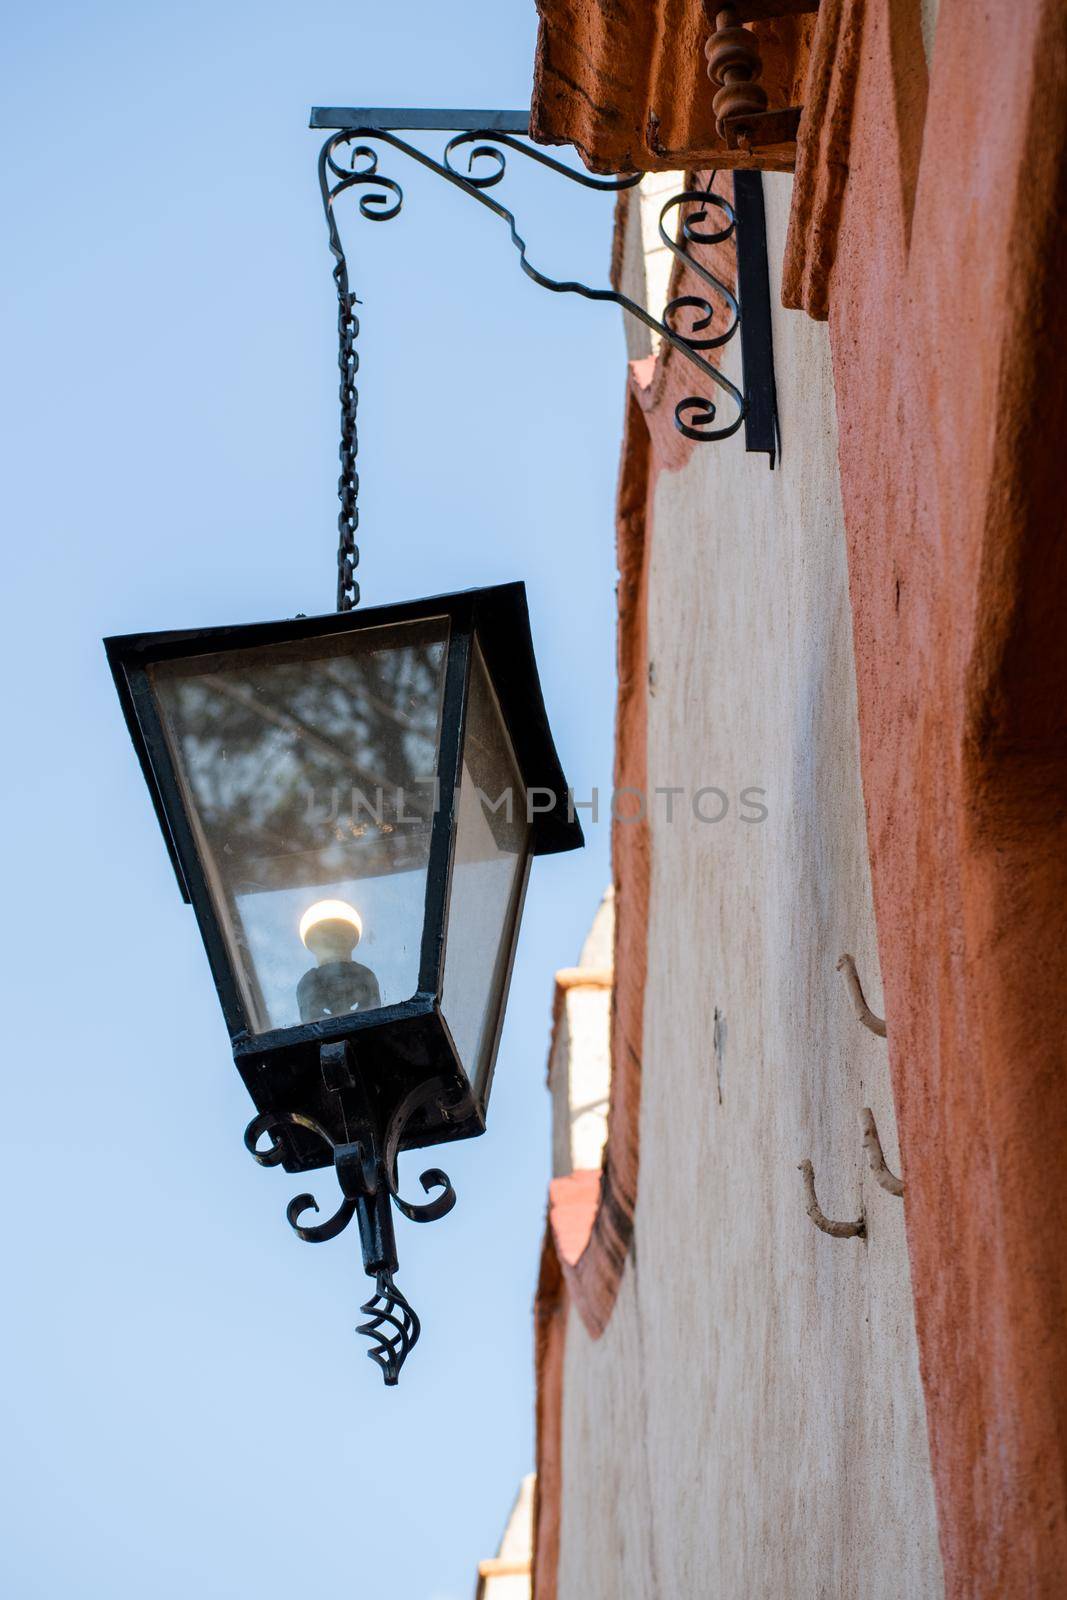 Classic lantern hanging from old building under a blue sky by Kanelbulle